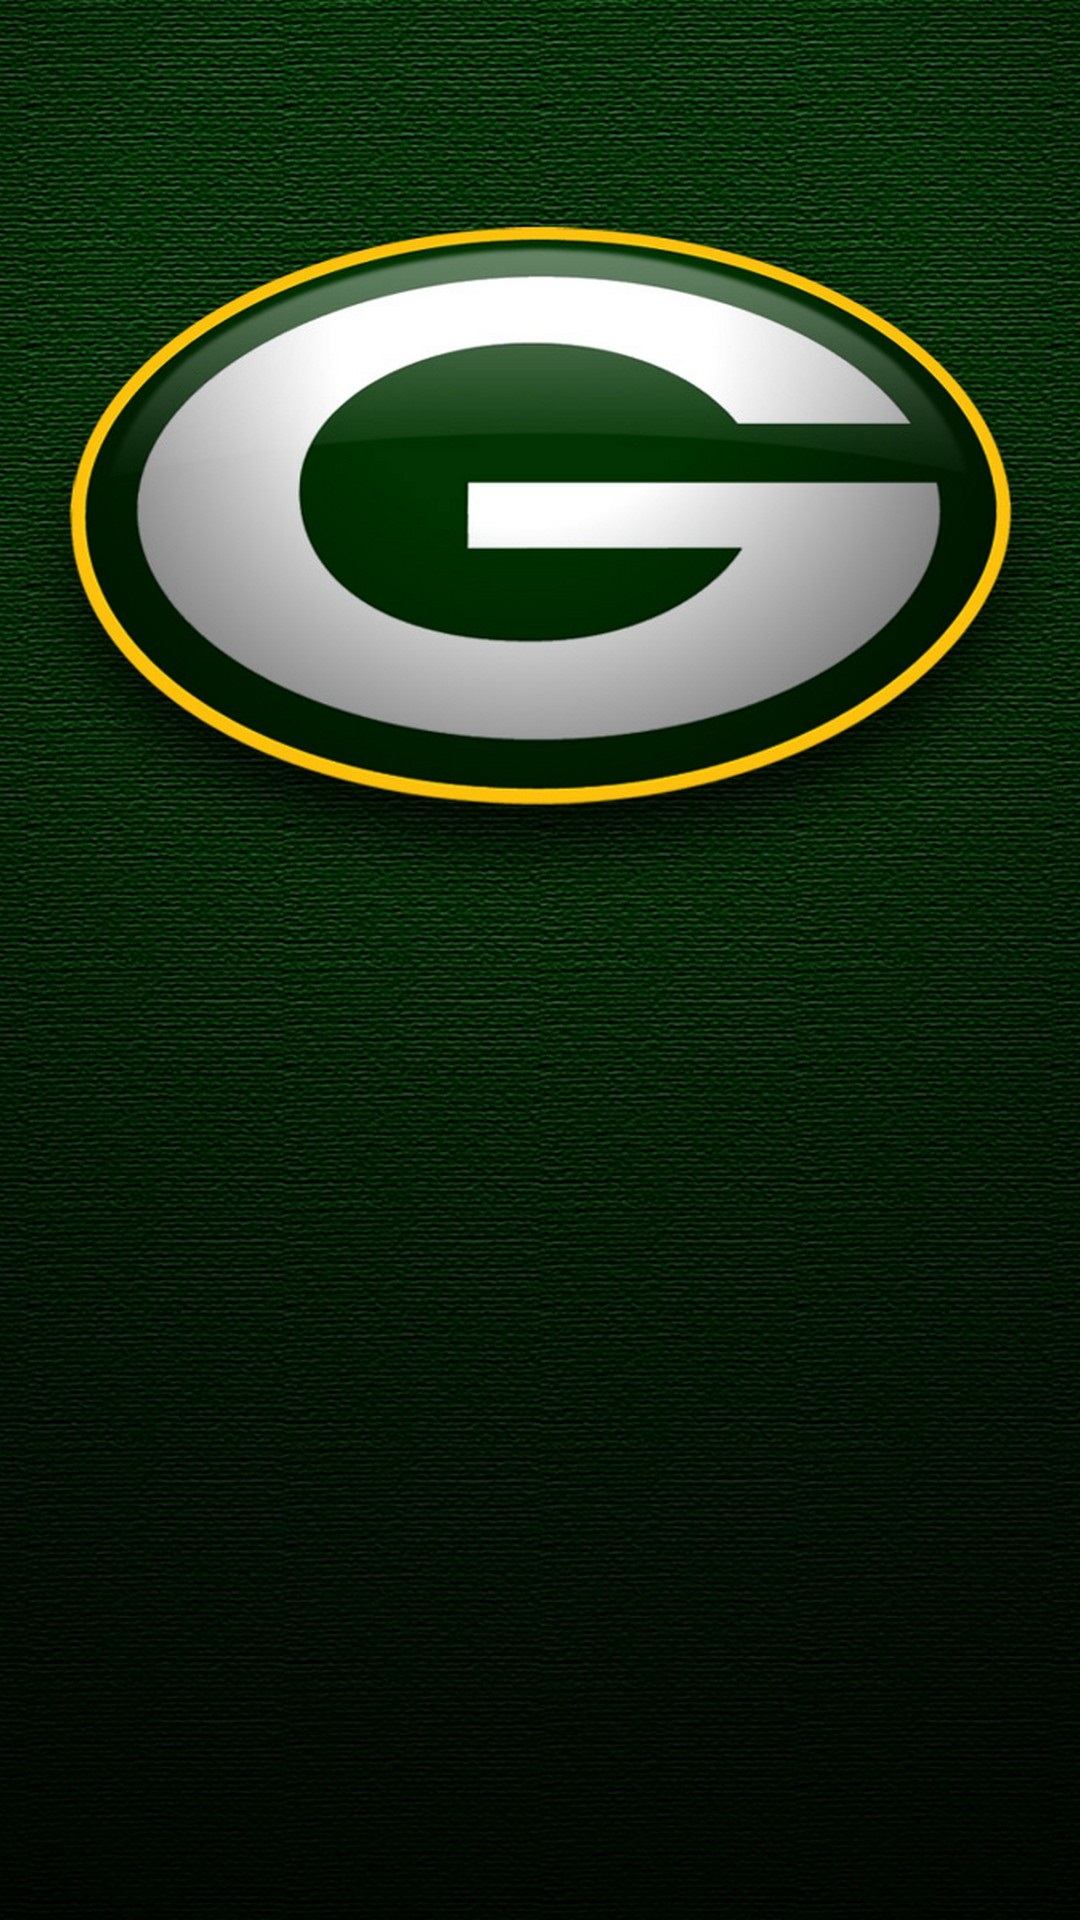 Green Bay Packers iPhone XR Wallpaper with high-resolution 1080x1920 pixel. Download and set as wallpaper for Apple iPhone X, XS Max, XR, 8, 7, 6, SE, iPad, Android